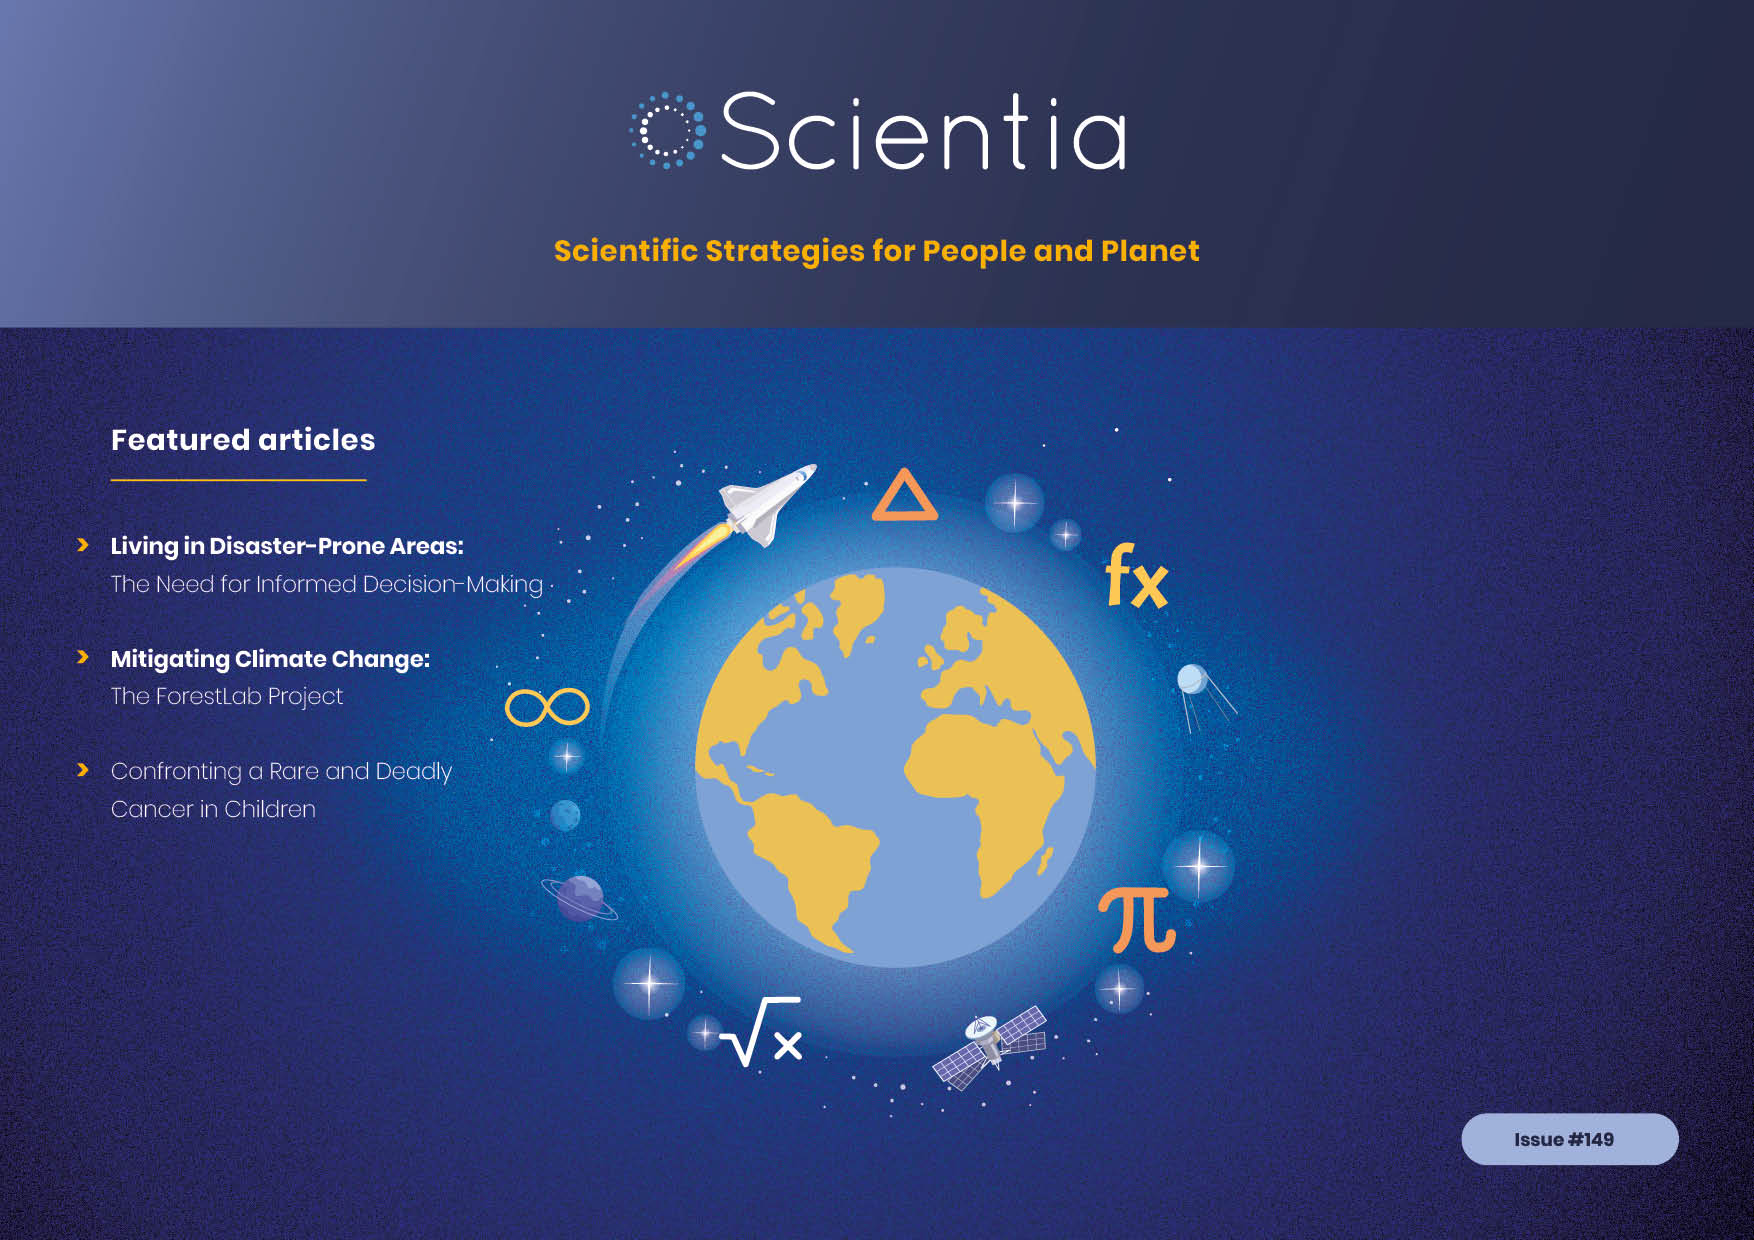 Scientia Issue #149 | Scientific Strategies for People and Planet